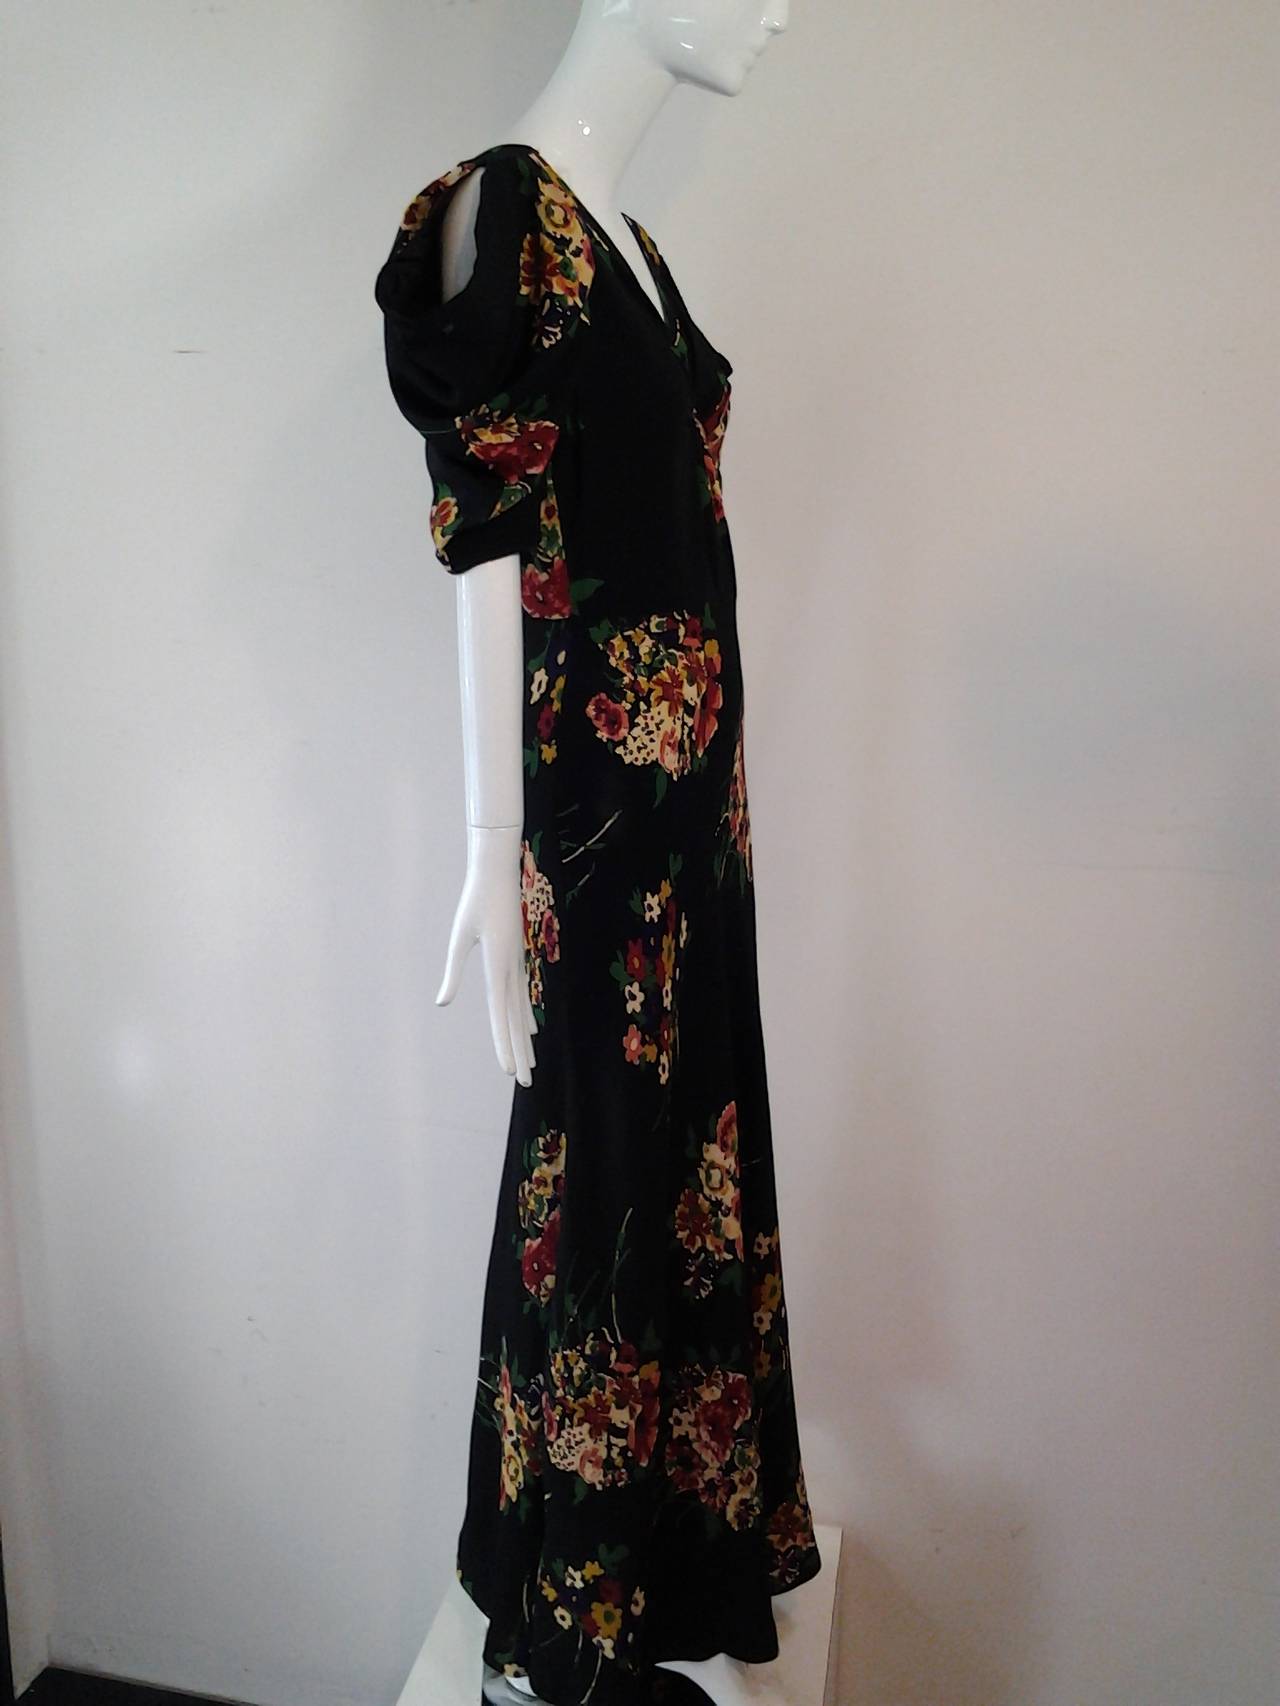 A wonderful 1930s bias-cut rayon floral print gown with center back buttons and draped peek-a-boo shoulder treatment.  Side snap and hook and eye closure.